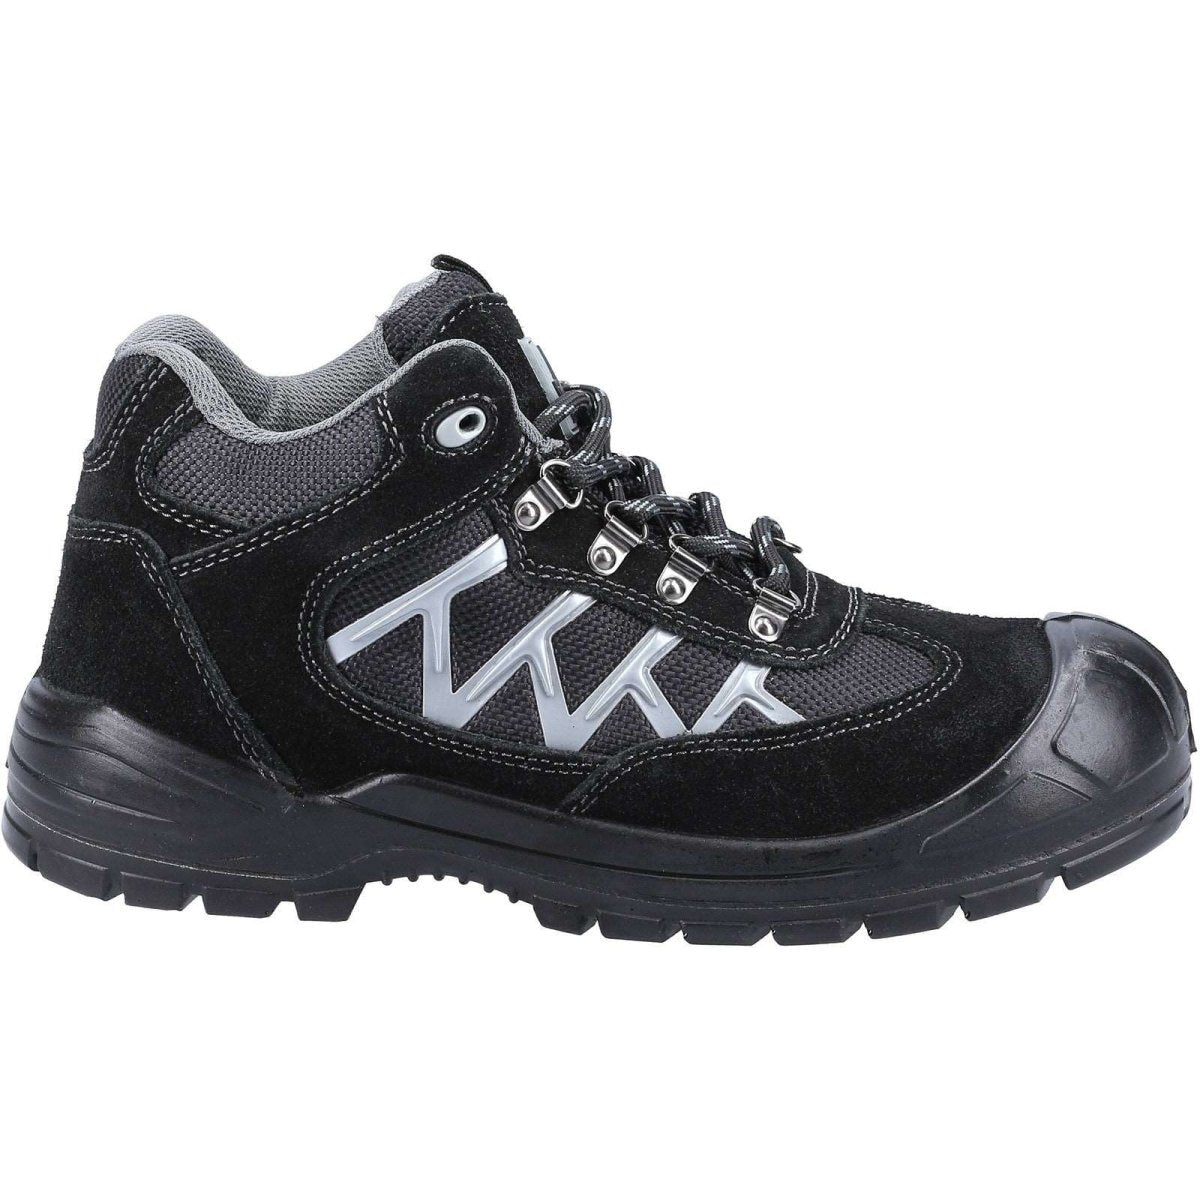 Amblers AS255 Suede Steel Toe & Midsole Safety Hiker Boots - Shoe Store Direct